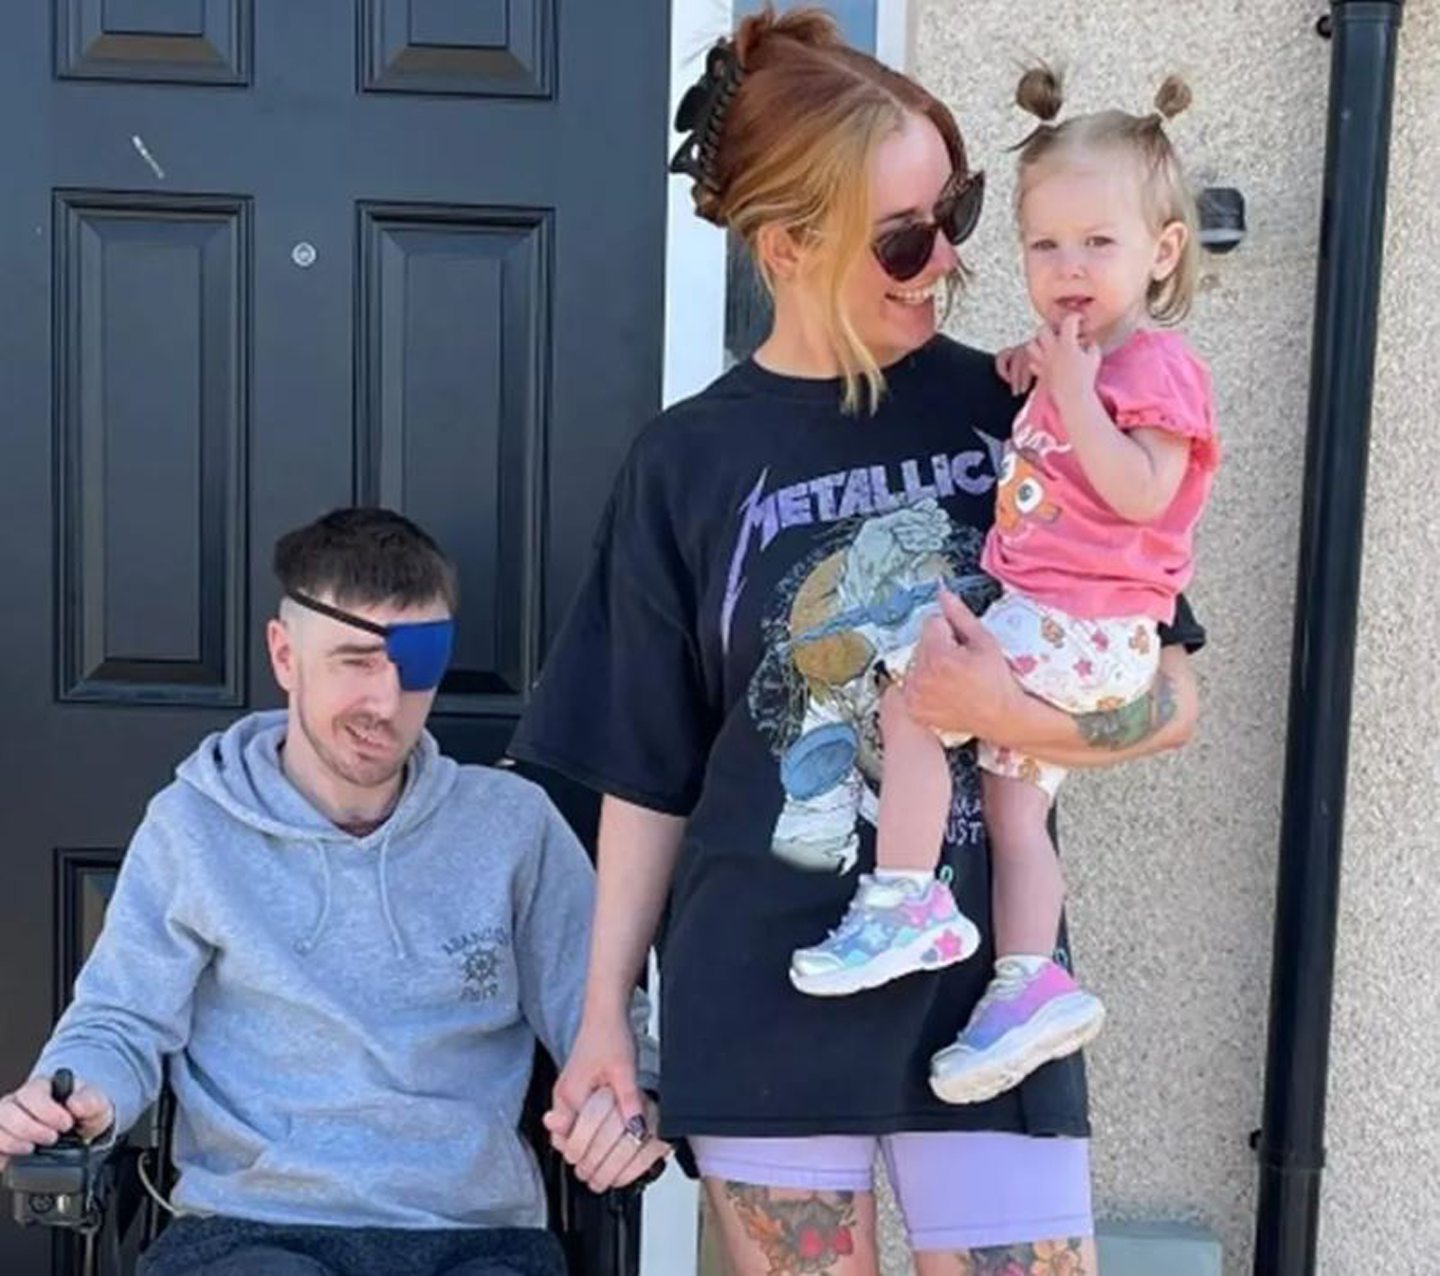 Andy Layton in wheelchair with wife Helen and daughter Lyra next to him. 